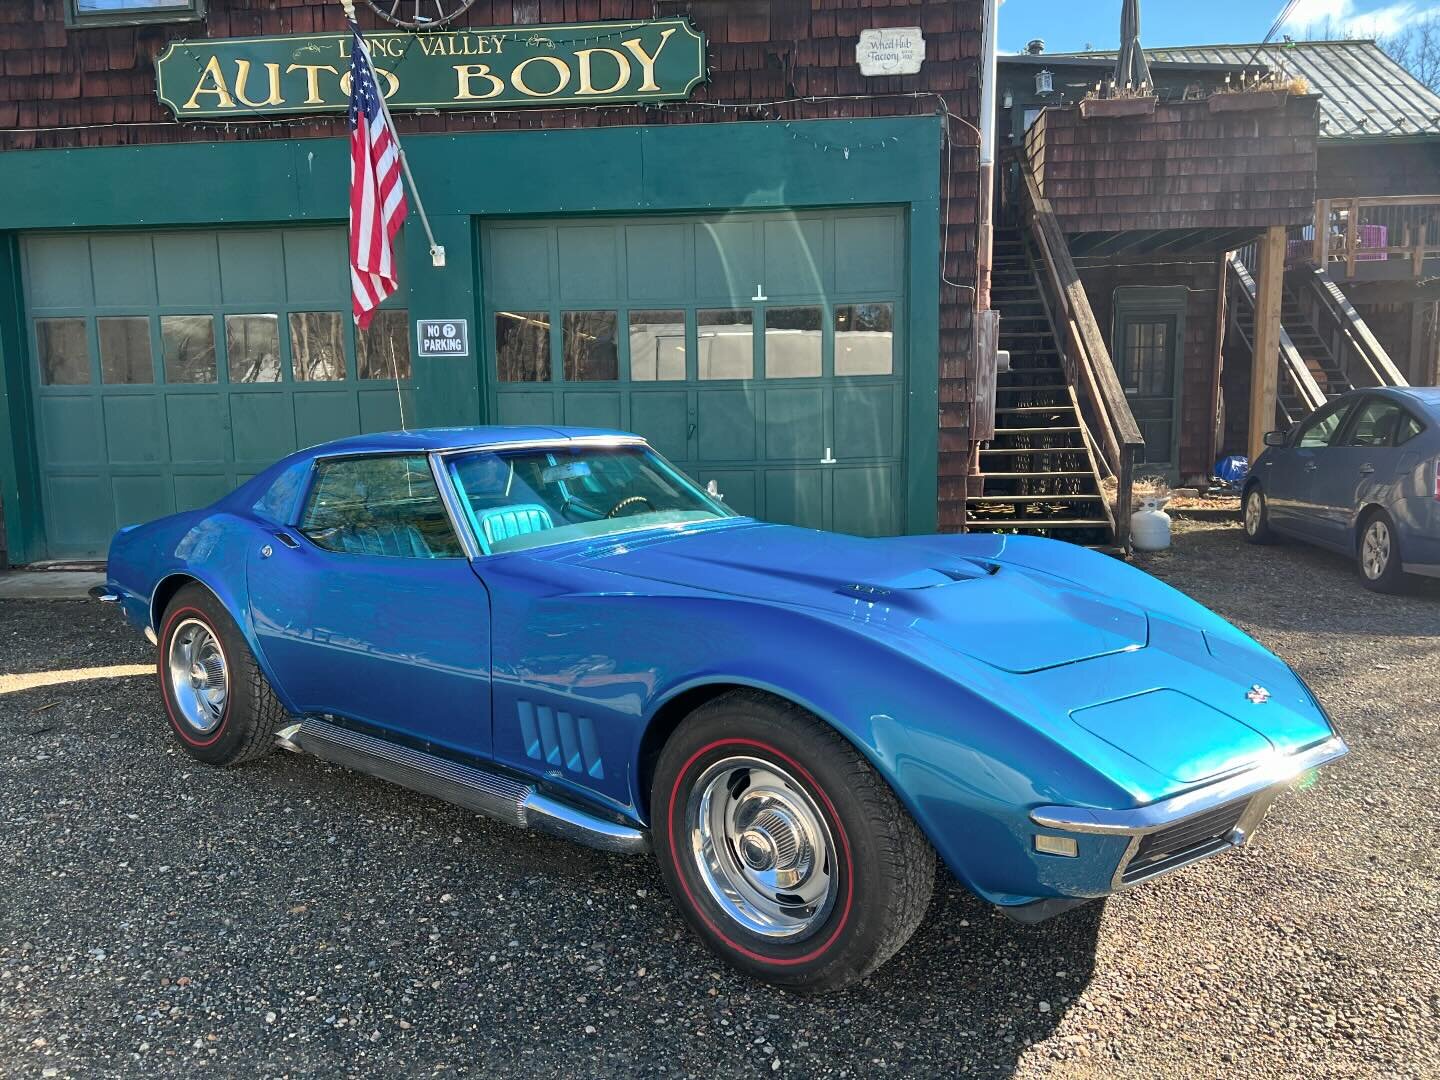 1968 Corvette 427 4spd when home today after minor repairs. Only non rain day today:)#longvalleyautobody #thatgirlwhopaintscars #1968corvette